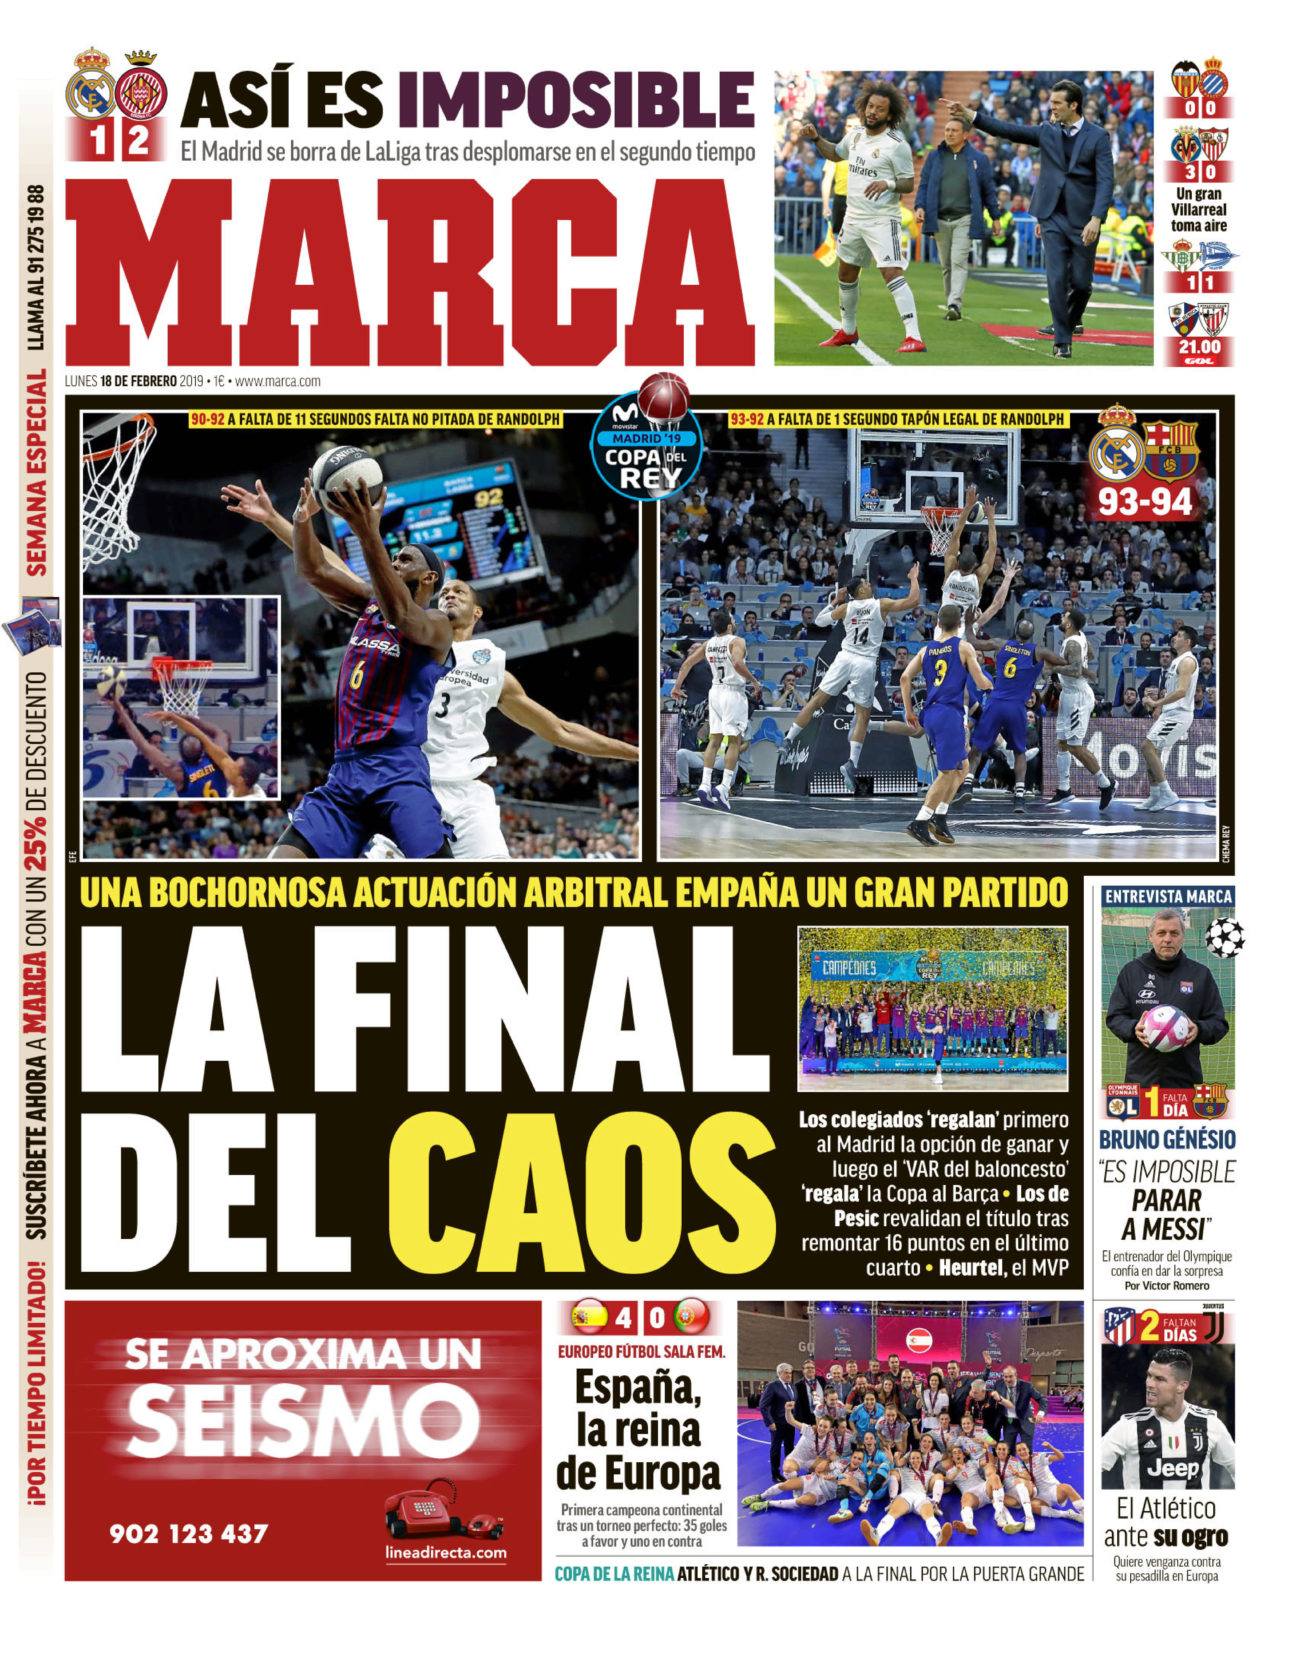 Madrid quit the league after collapsing in the second half / The final...